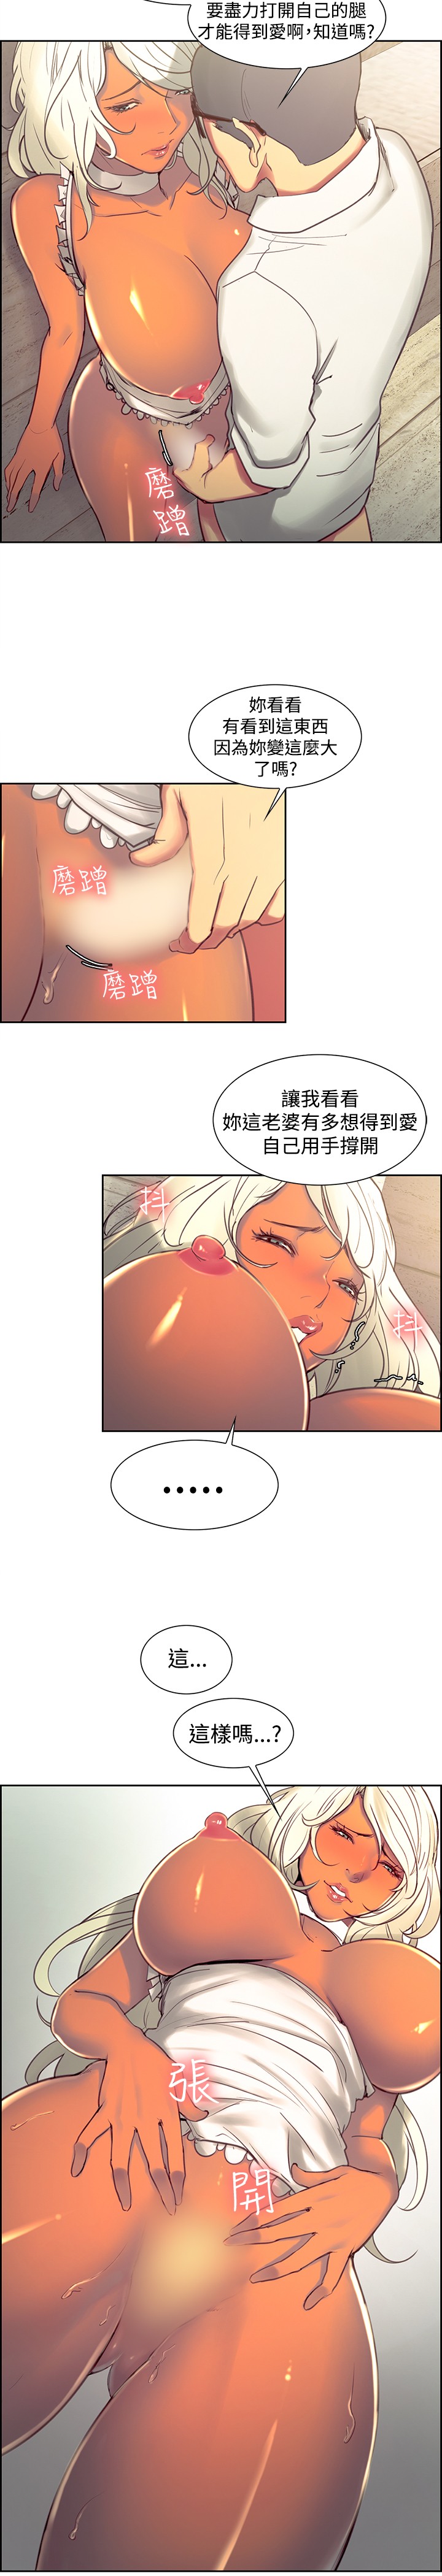 [Serious] Domesticate the Housekeeper 调教家政妇 Ch.29~44END [Chinese]中文 